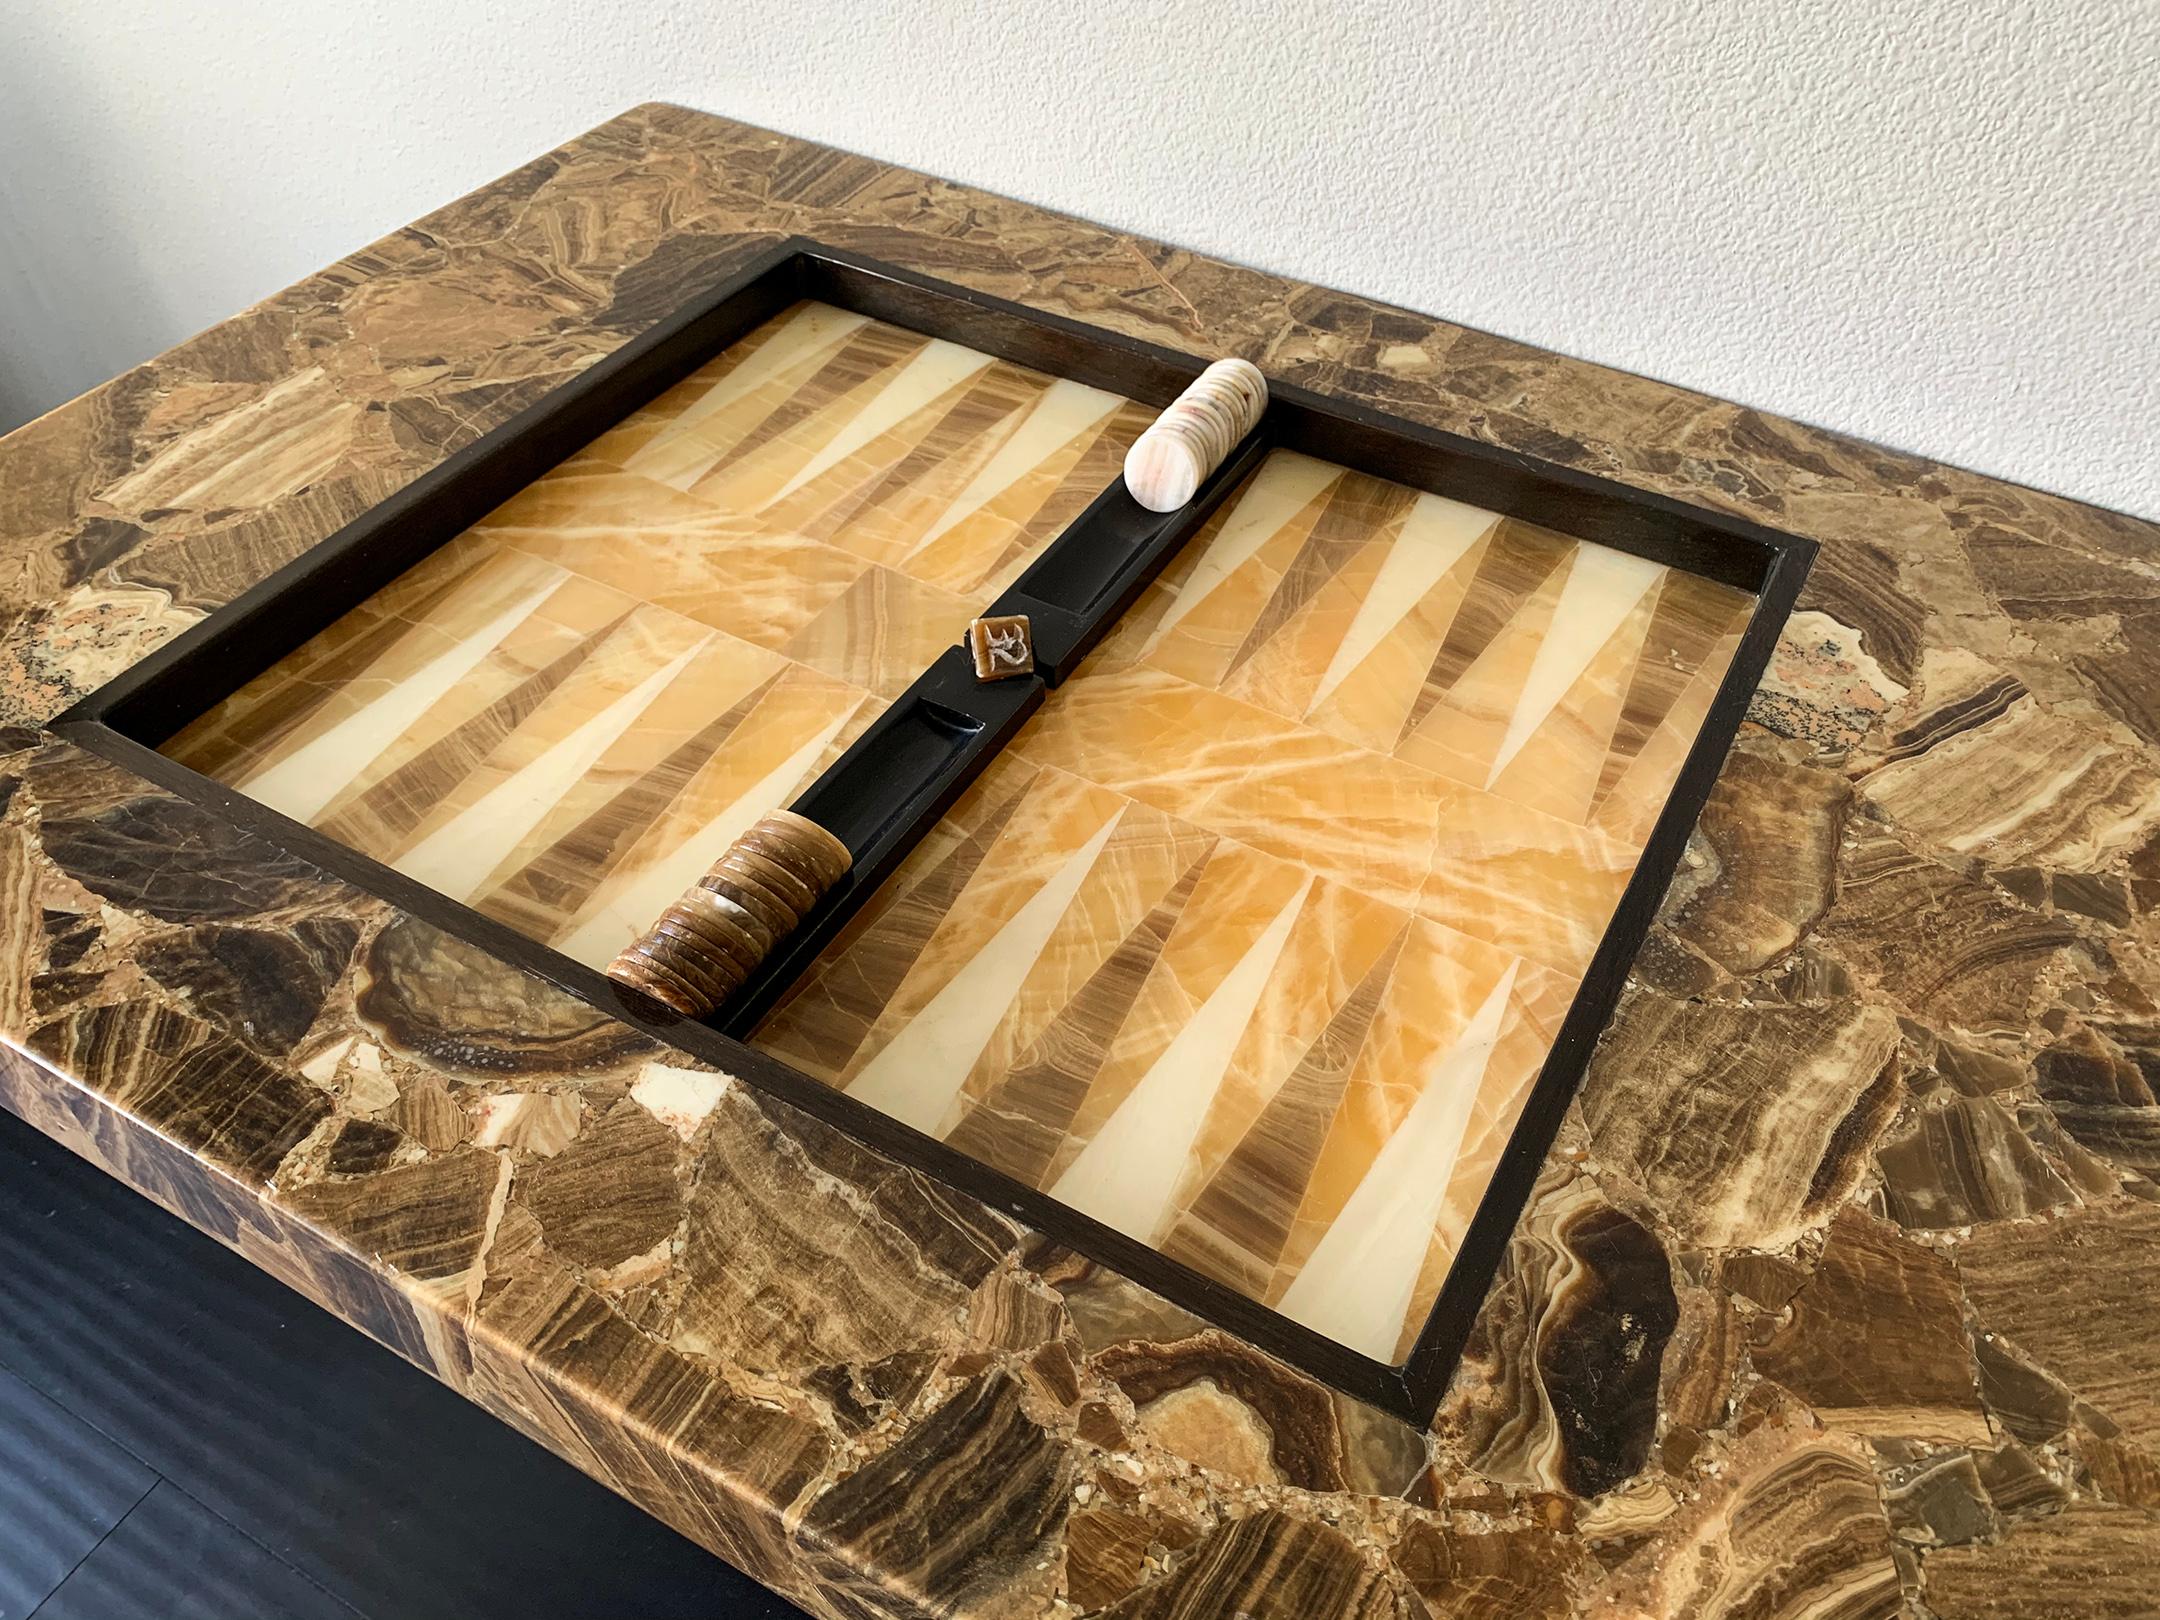 This stone backgammon table is absolutely stunning! With an inlay stone top, stone pieces and doubling cube, this piece almost has a brutalist feel. A super chic, midcentury game table.